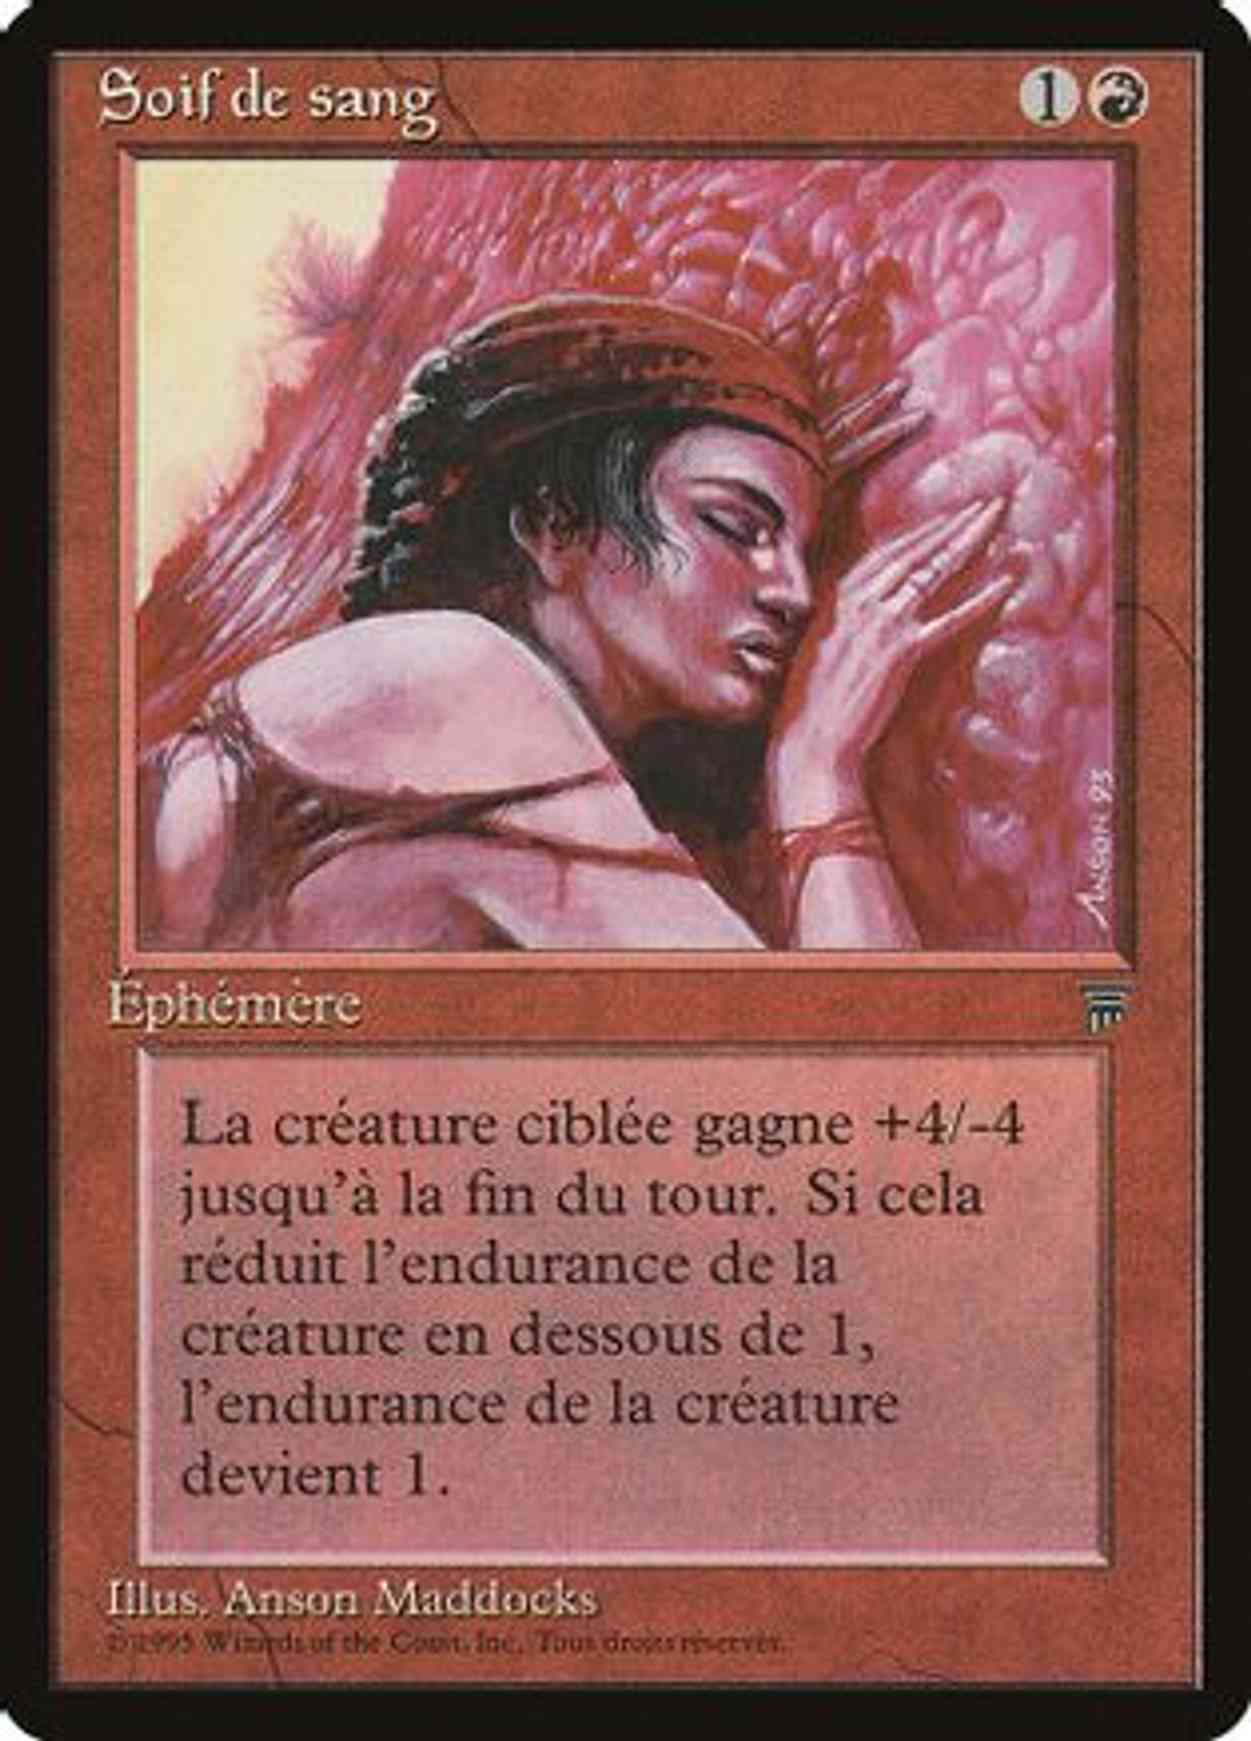 Blood Lust (French) - "Soif de sang" magic card front